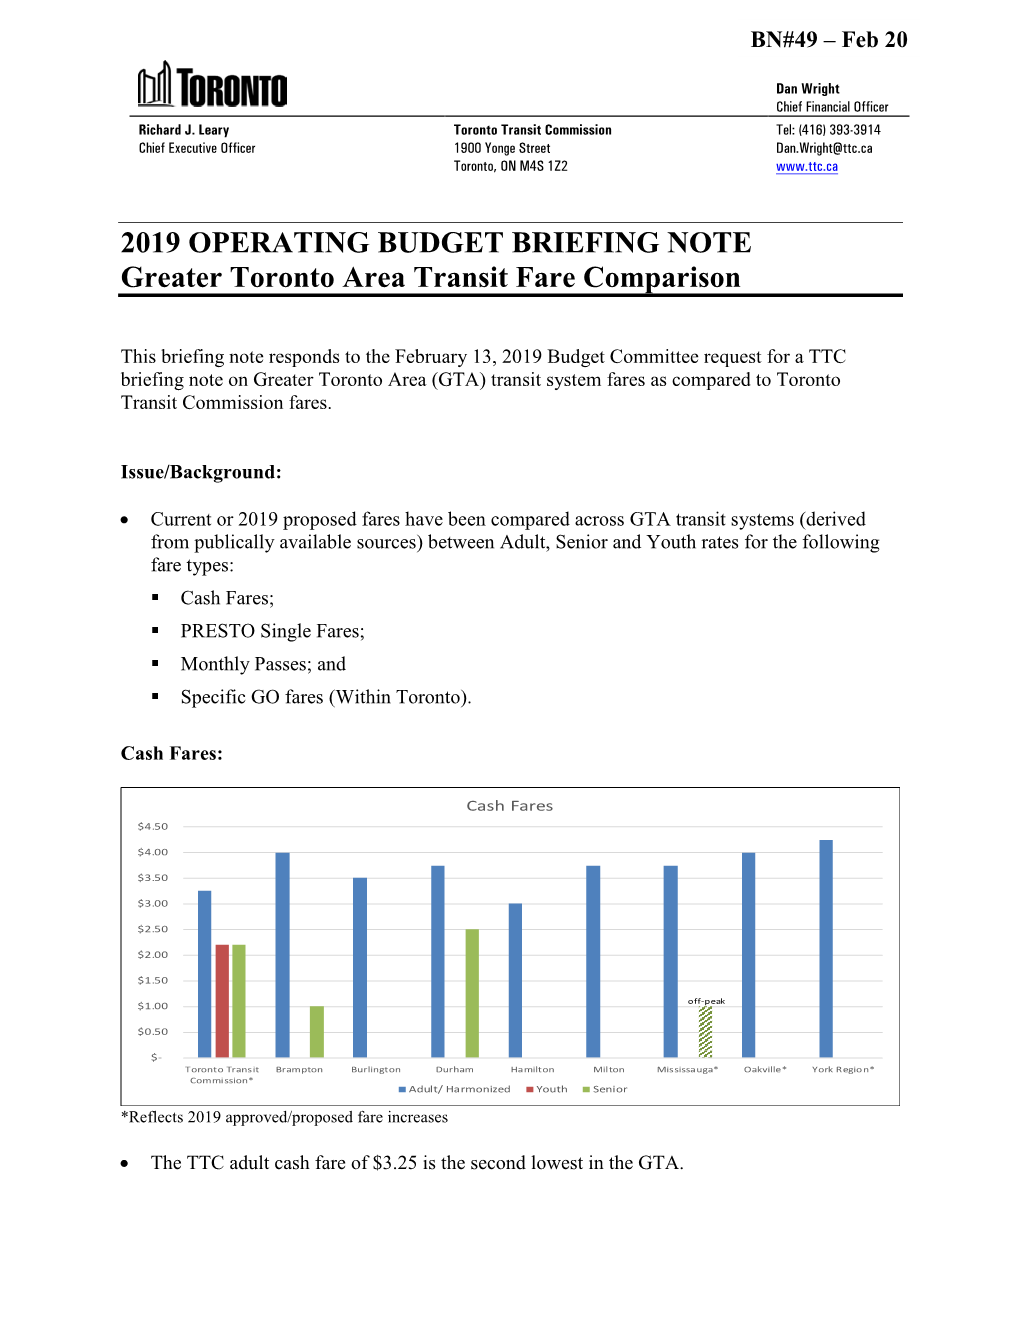 2019 Operating Budgt Brieifing Note